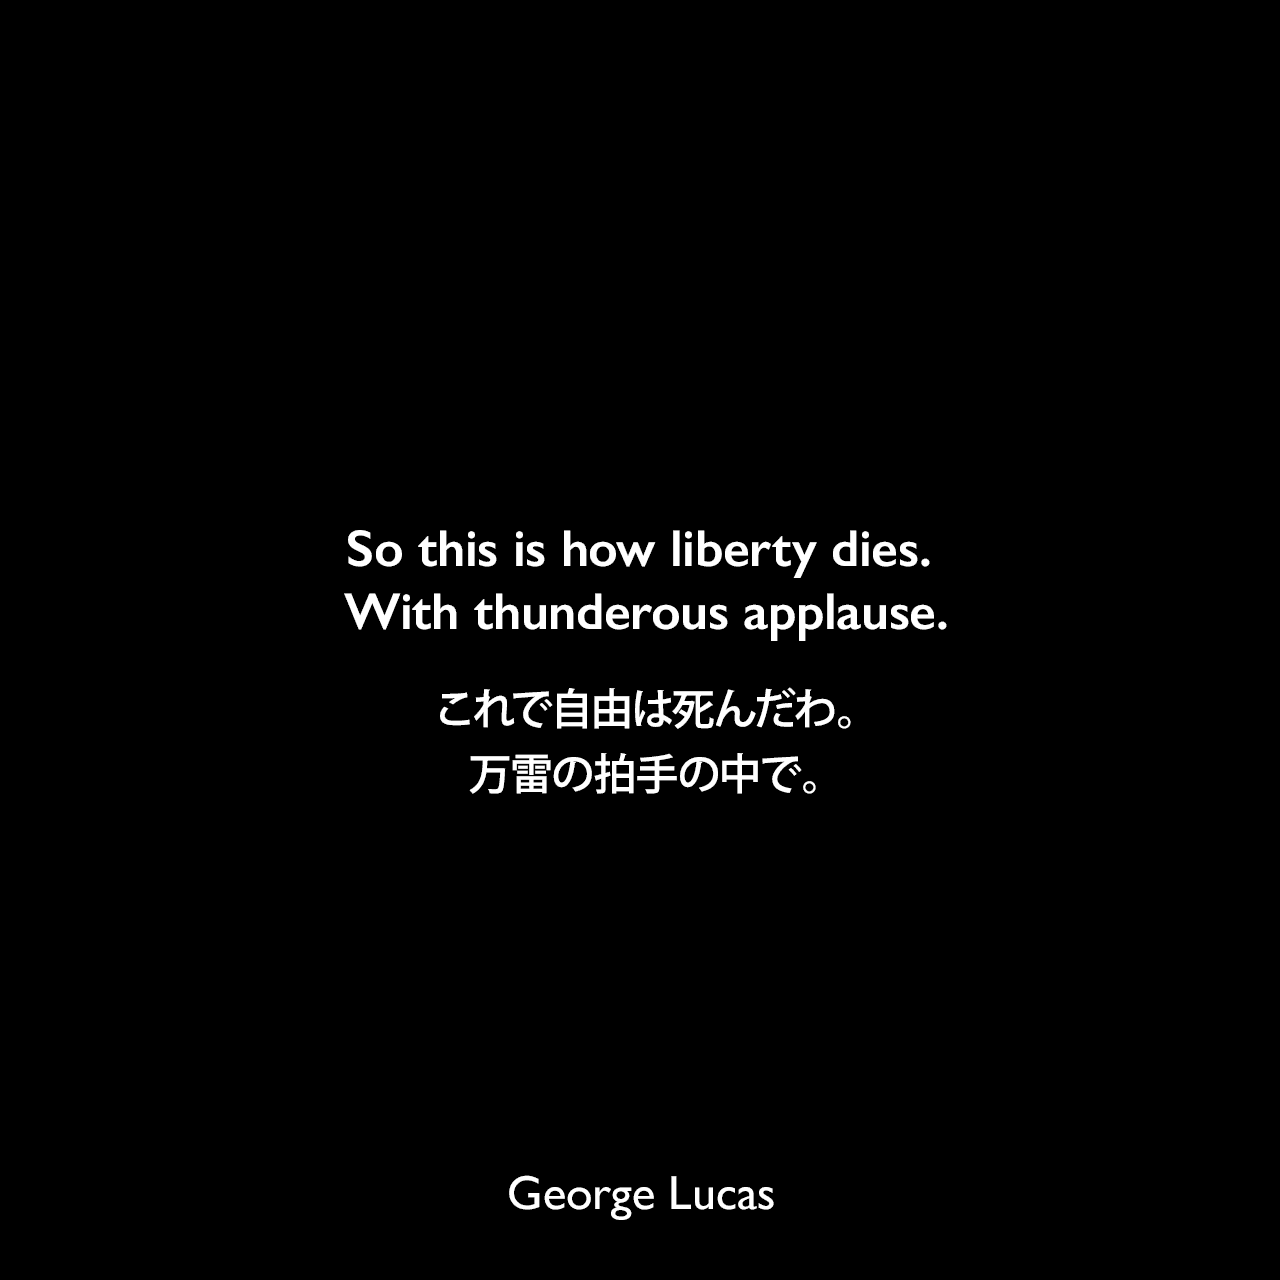 So this is how liberty dies. With thunderous applause.これで自由は死んだわ。万雷の拍手の中で。- アミダラ議員の言葉（Star Wars: Episode III - Revenge of the Sith シスの復讐）George Lucas